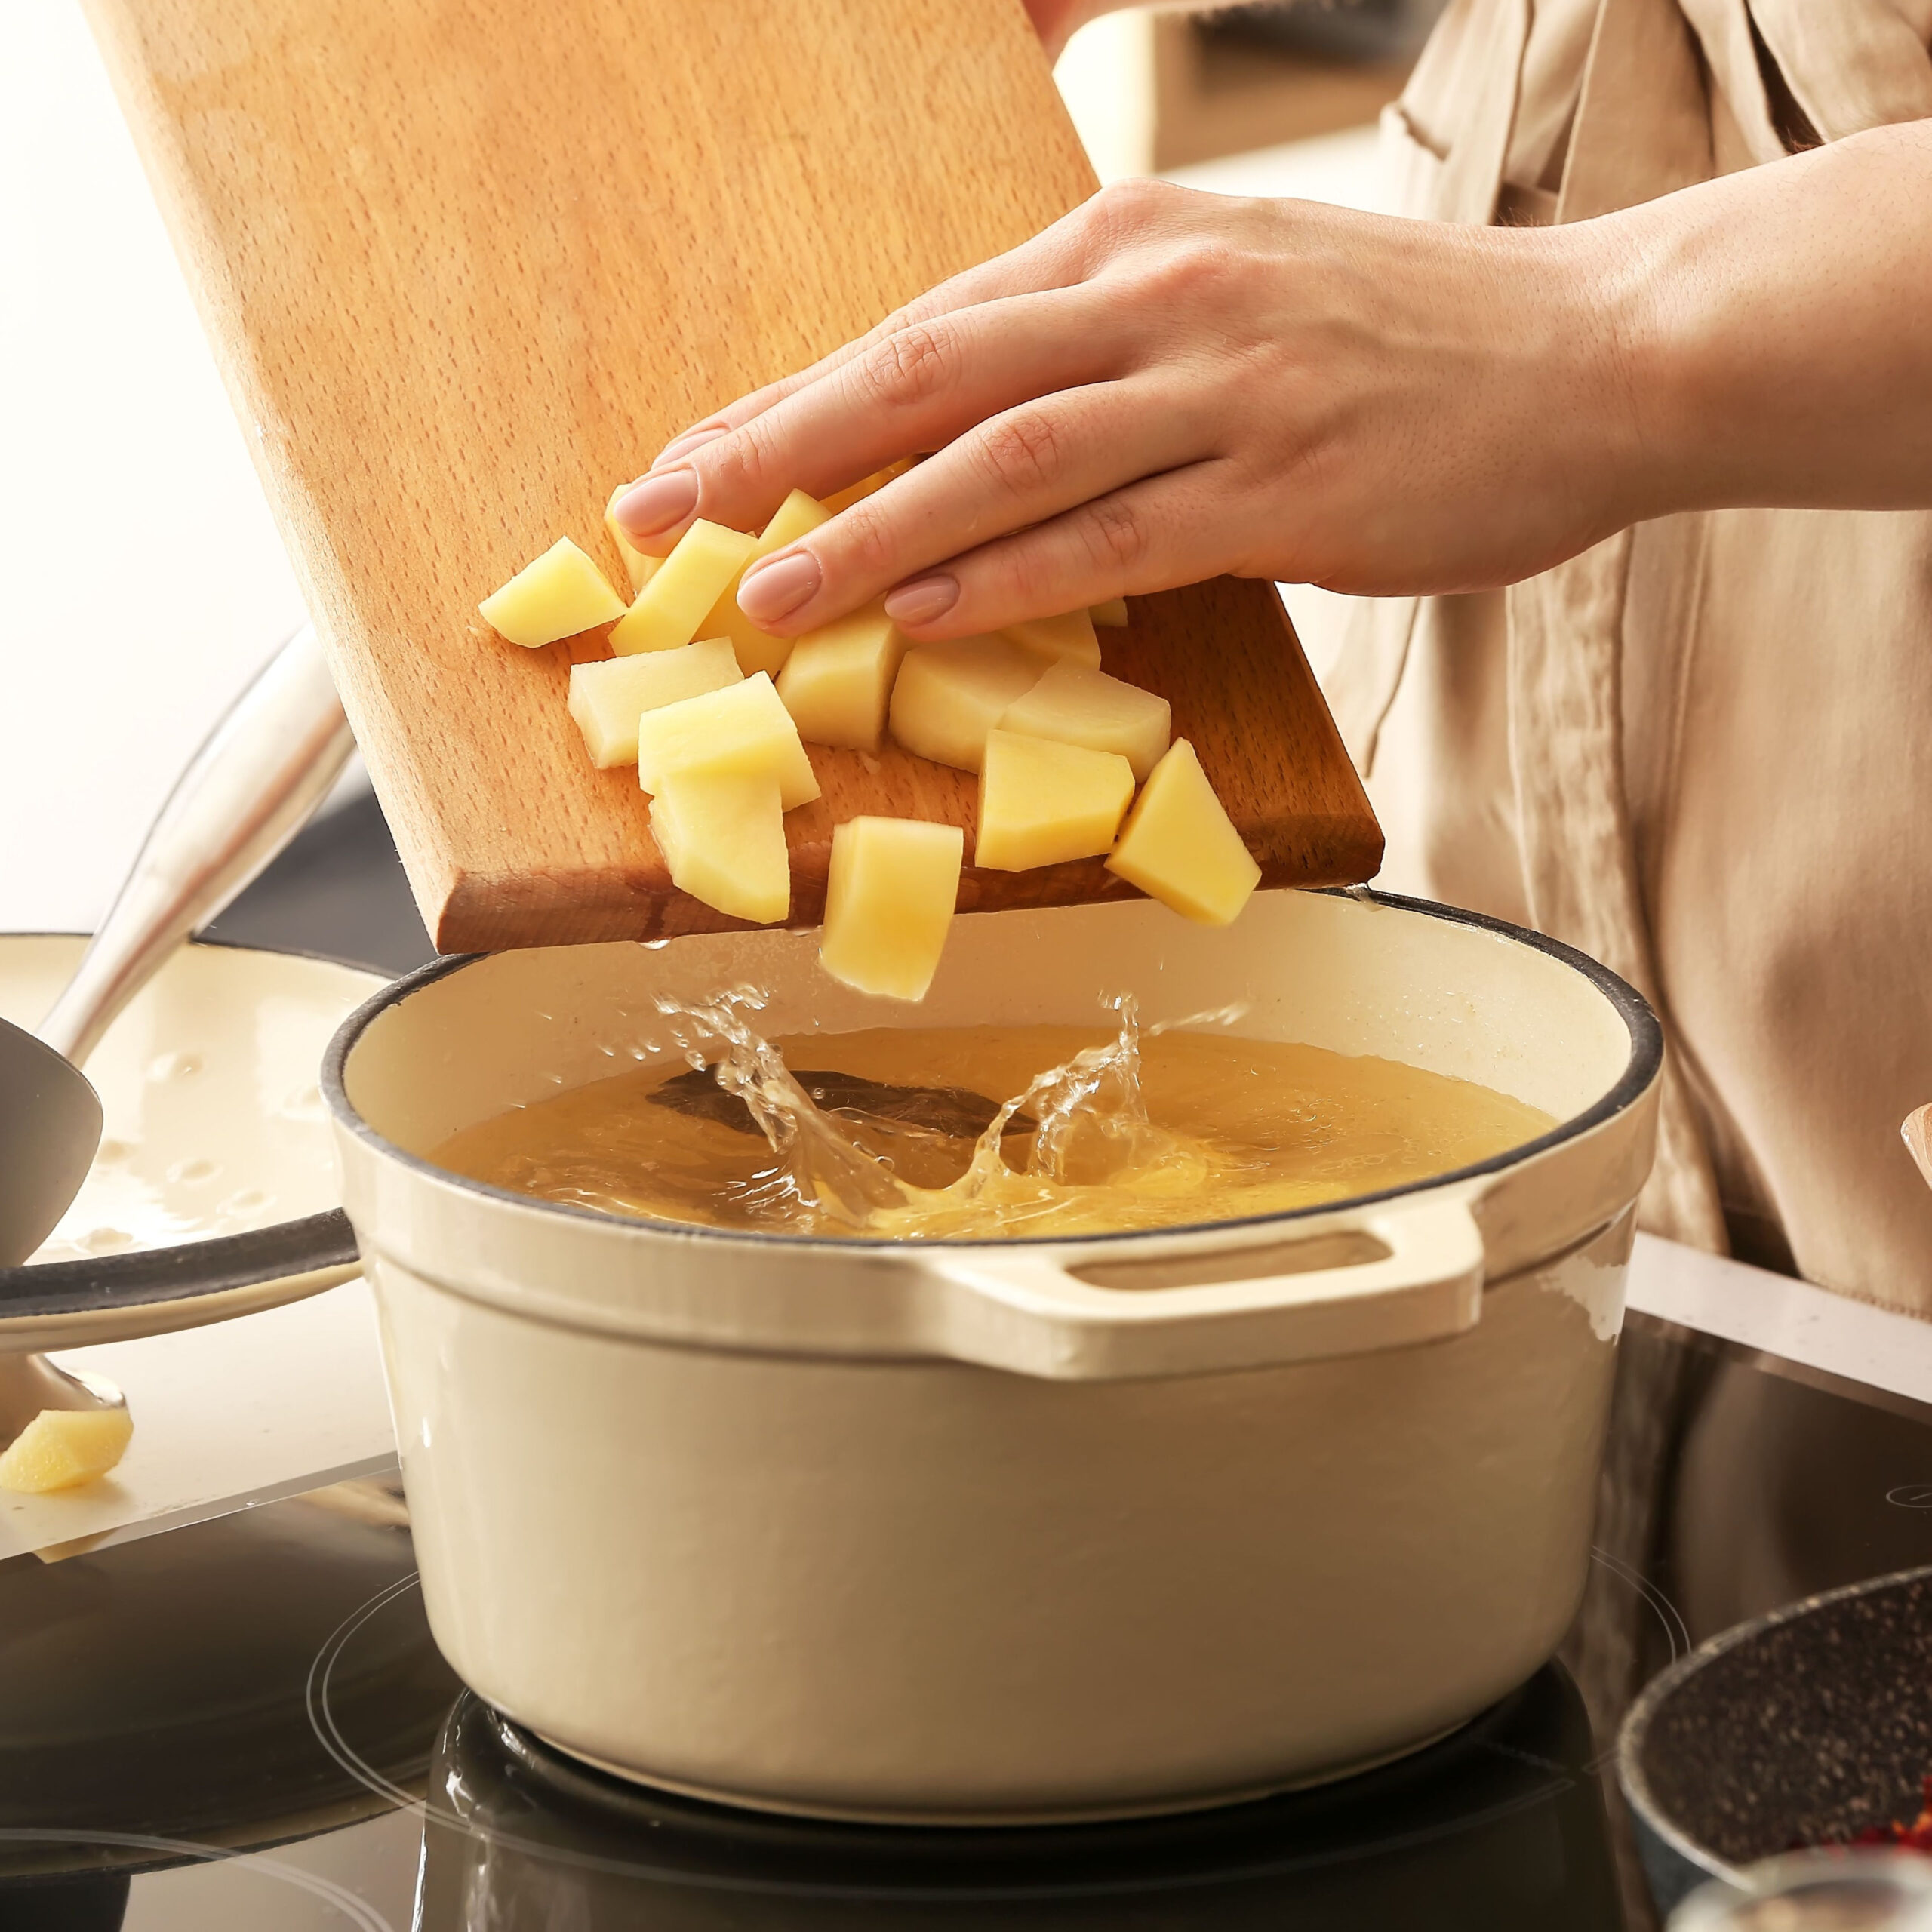 woman adding dice potatoes from cutting board to pot on stove